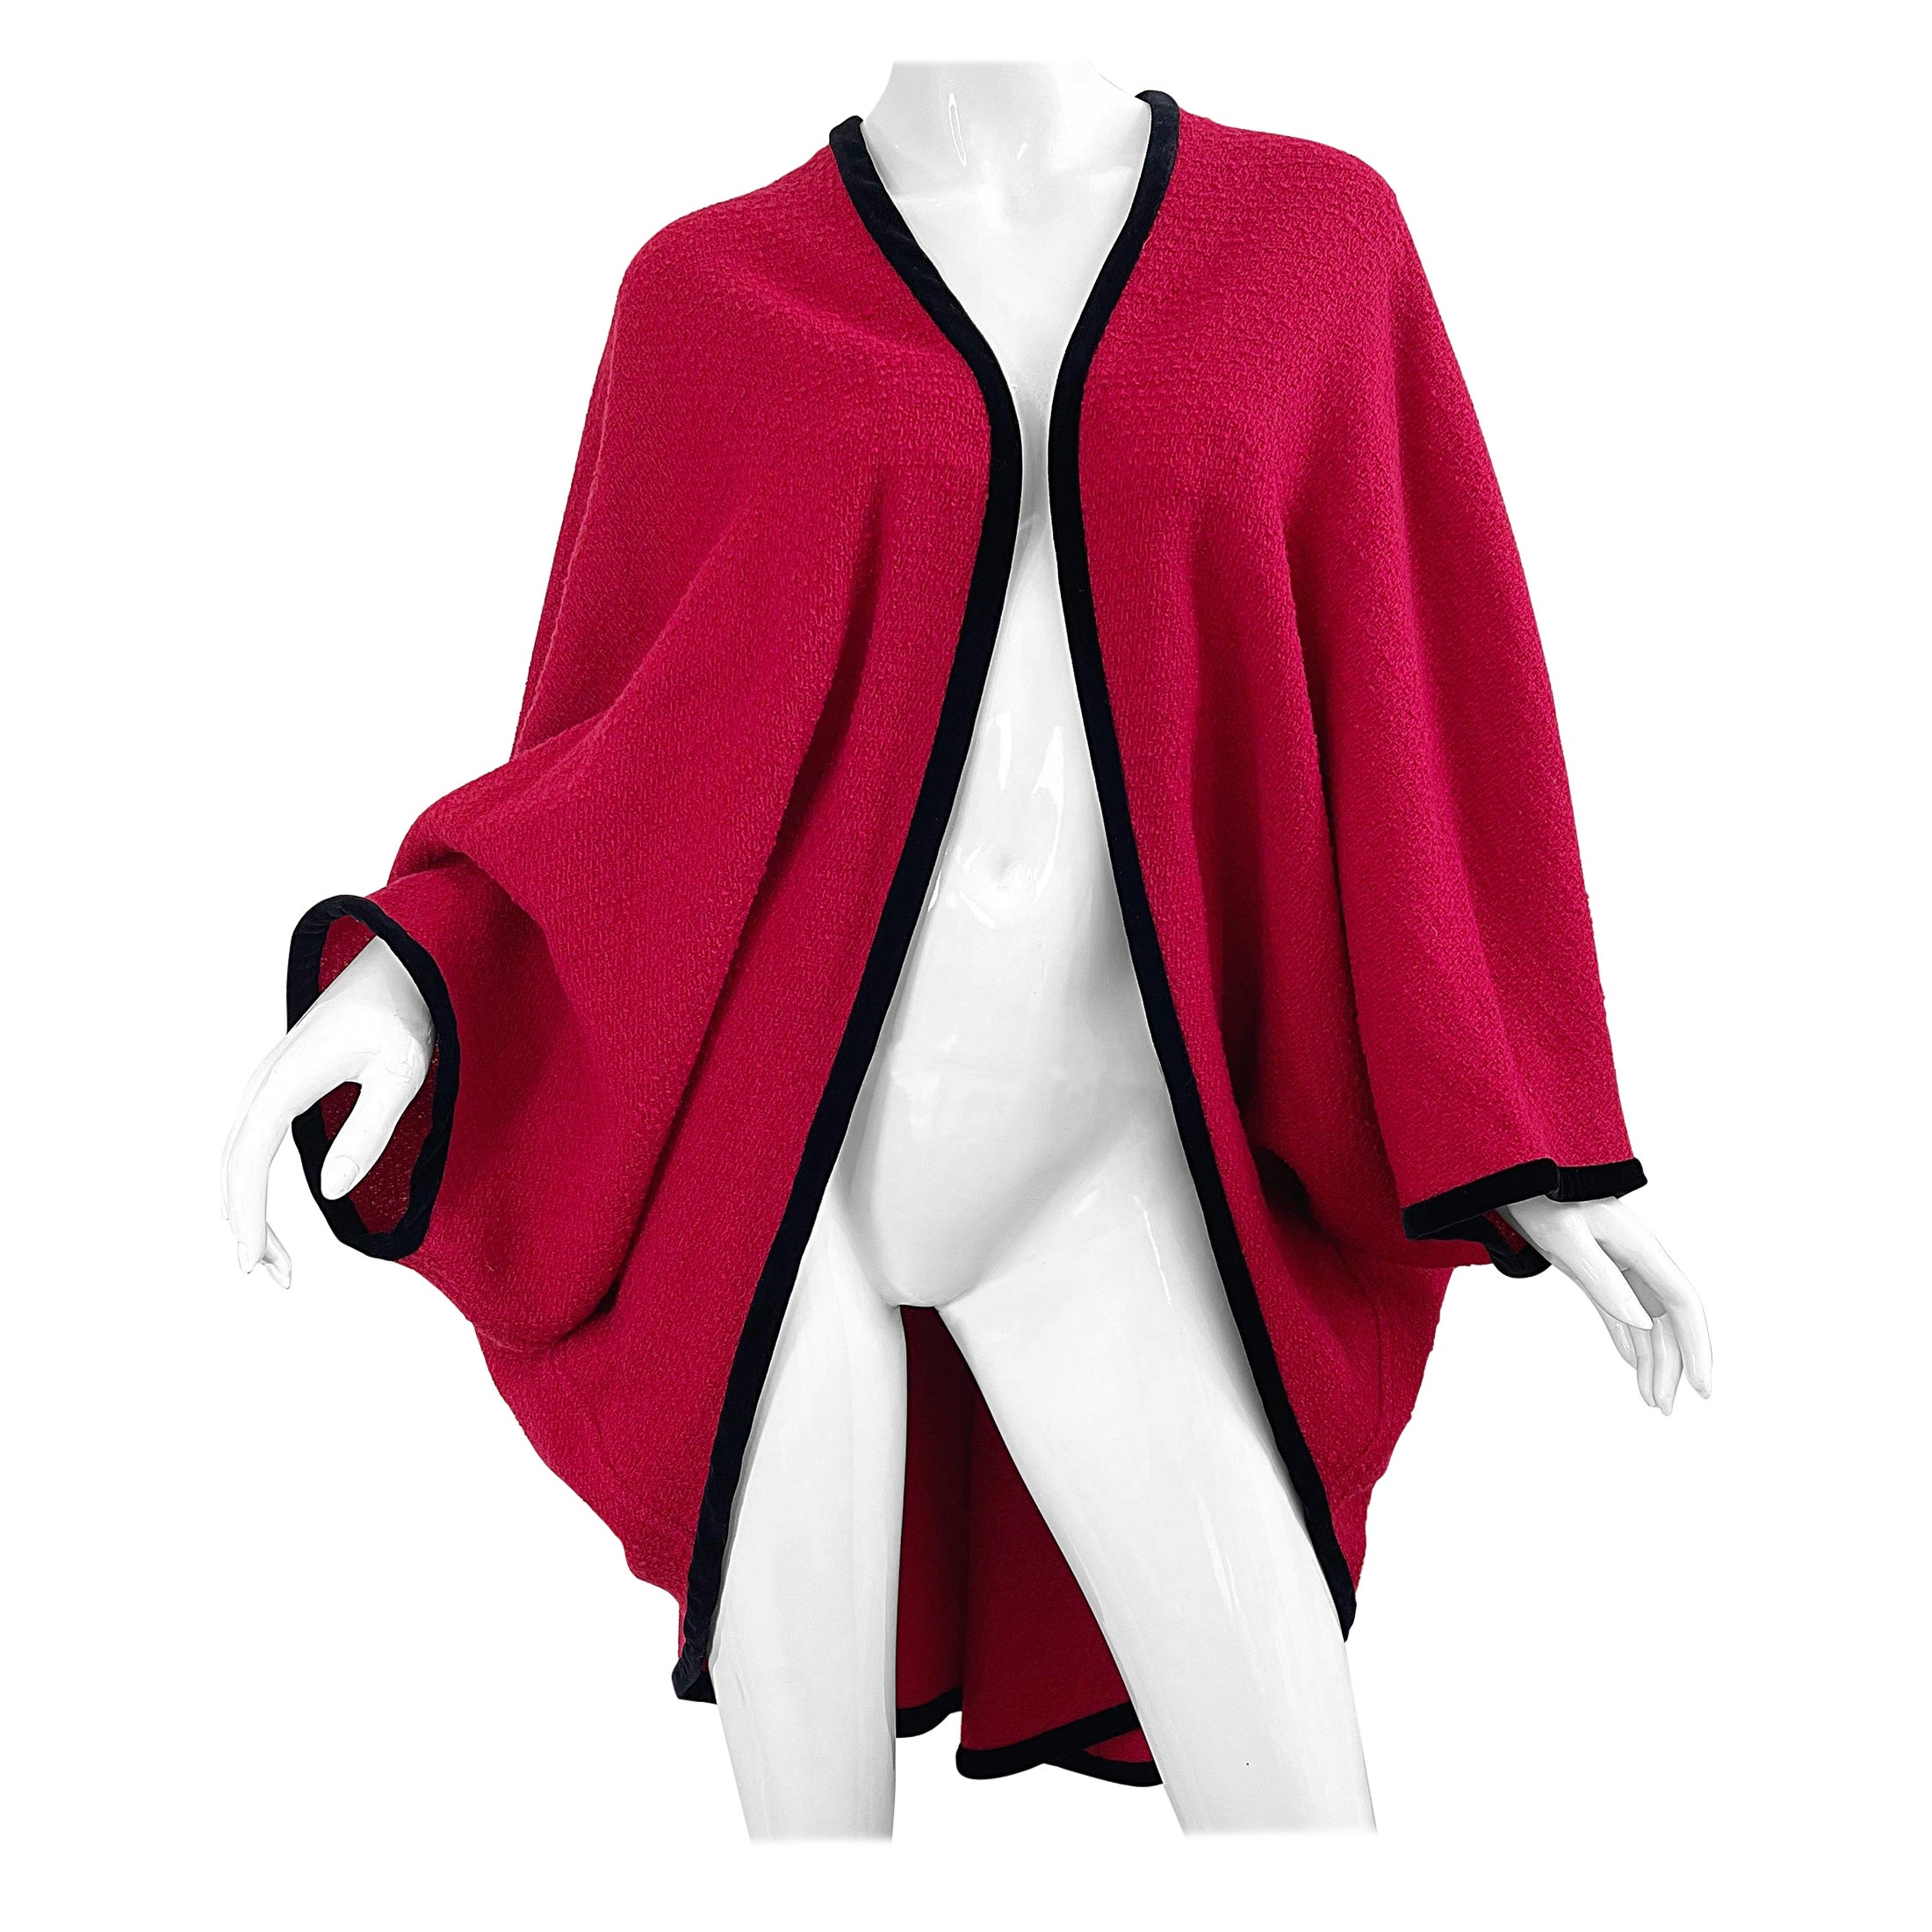 Karl Lagerfeld 1980s Lipstick Red Boiled Wool Cocoon Vintage Cape Kimono Jacket For Sale